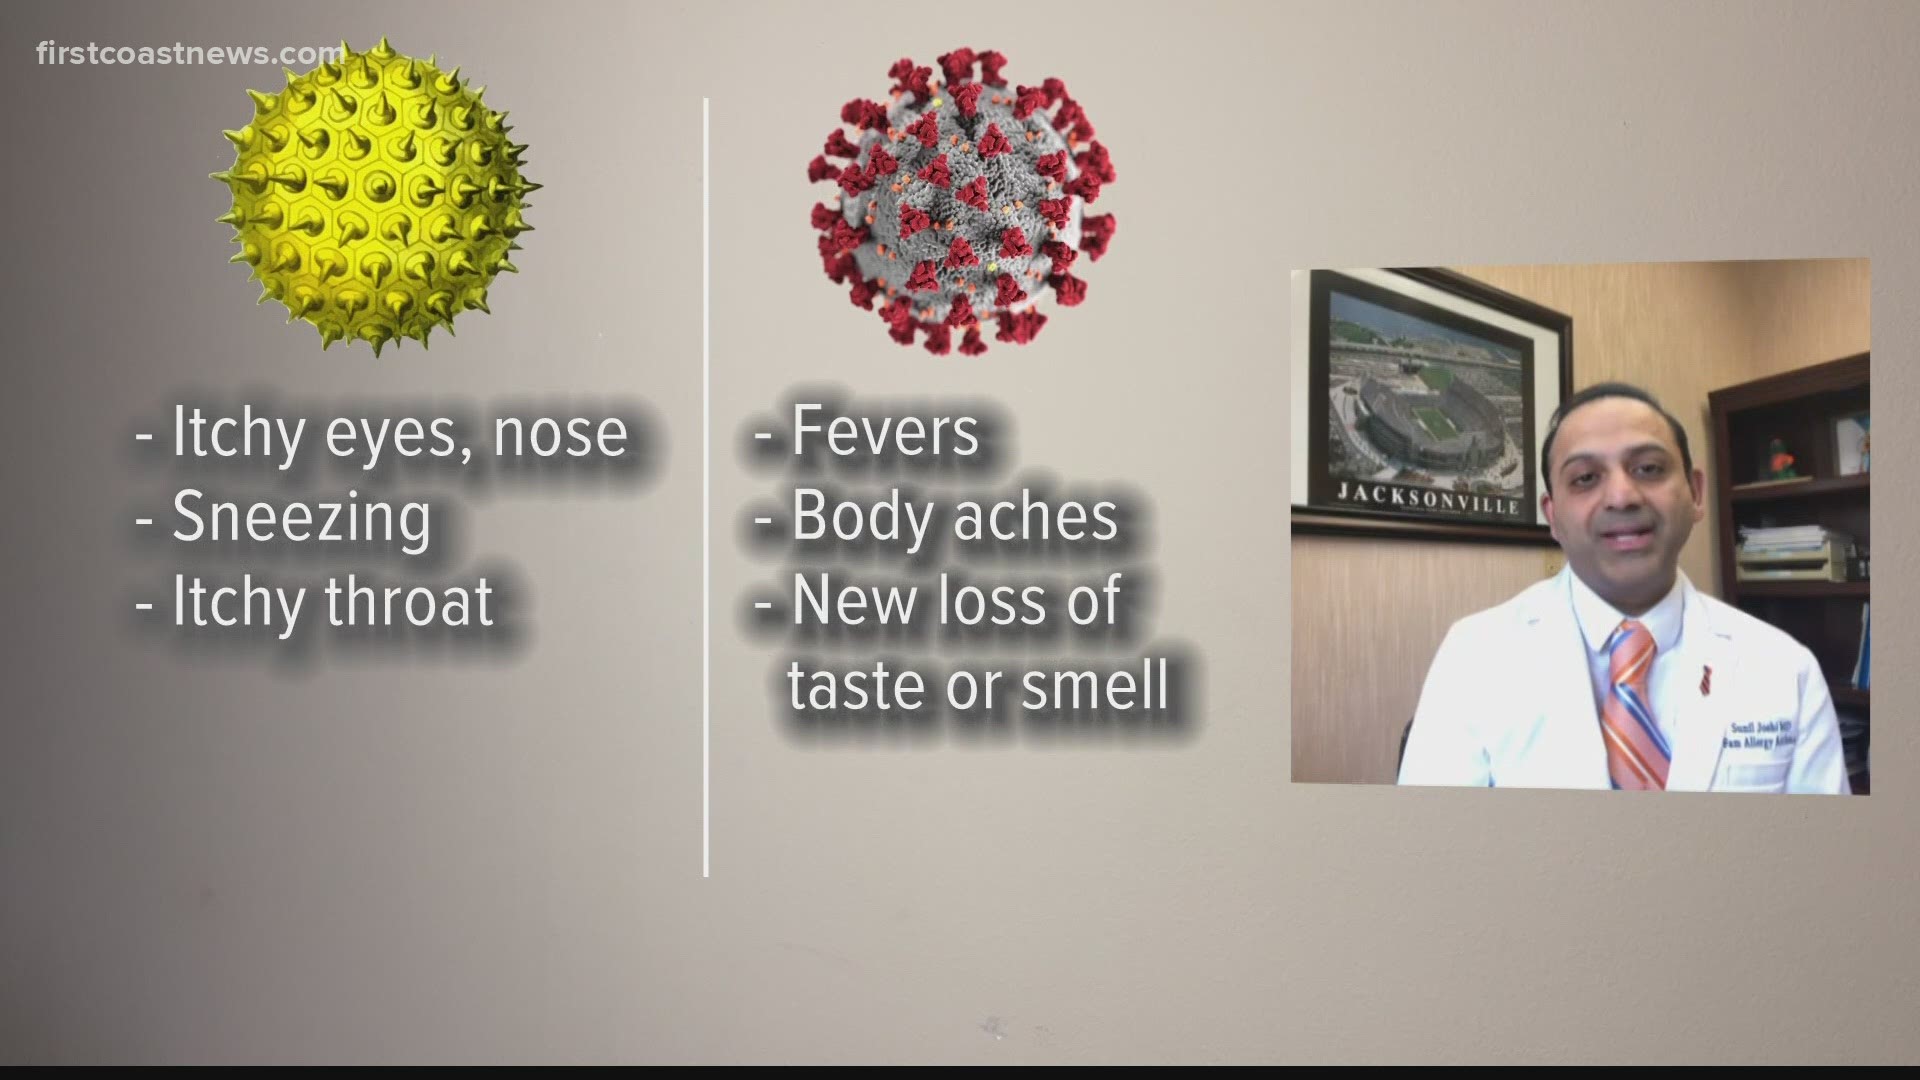 Allergies or COVID-19? Immunologist breaks down the different symptoms